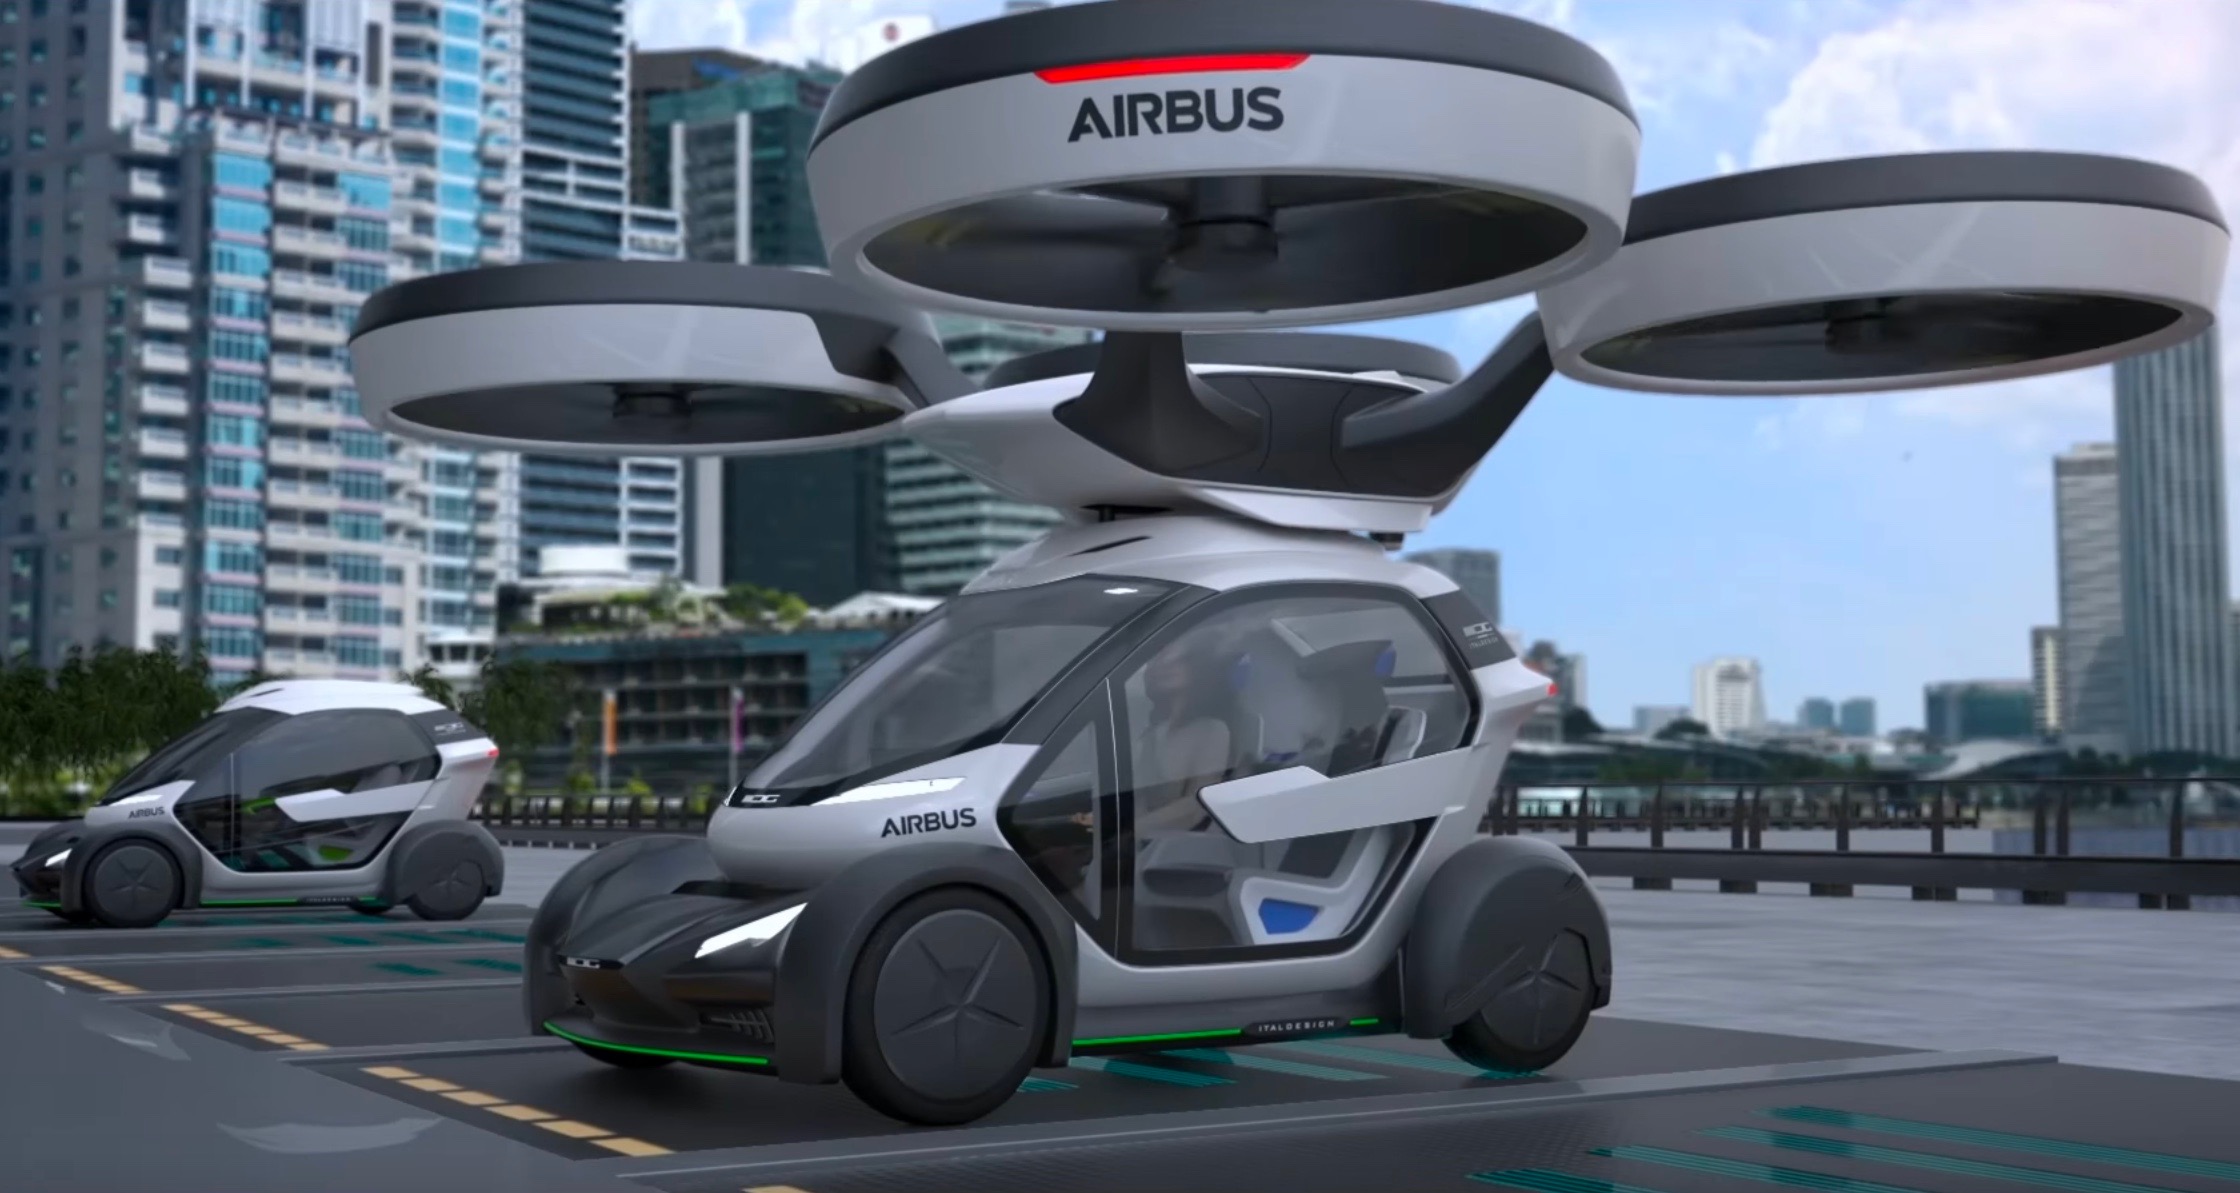 Italdesign & Airbus reveal futuristic ‘Pop.Up’ car with drone capability (video)